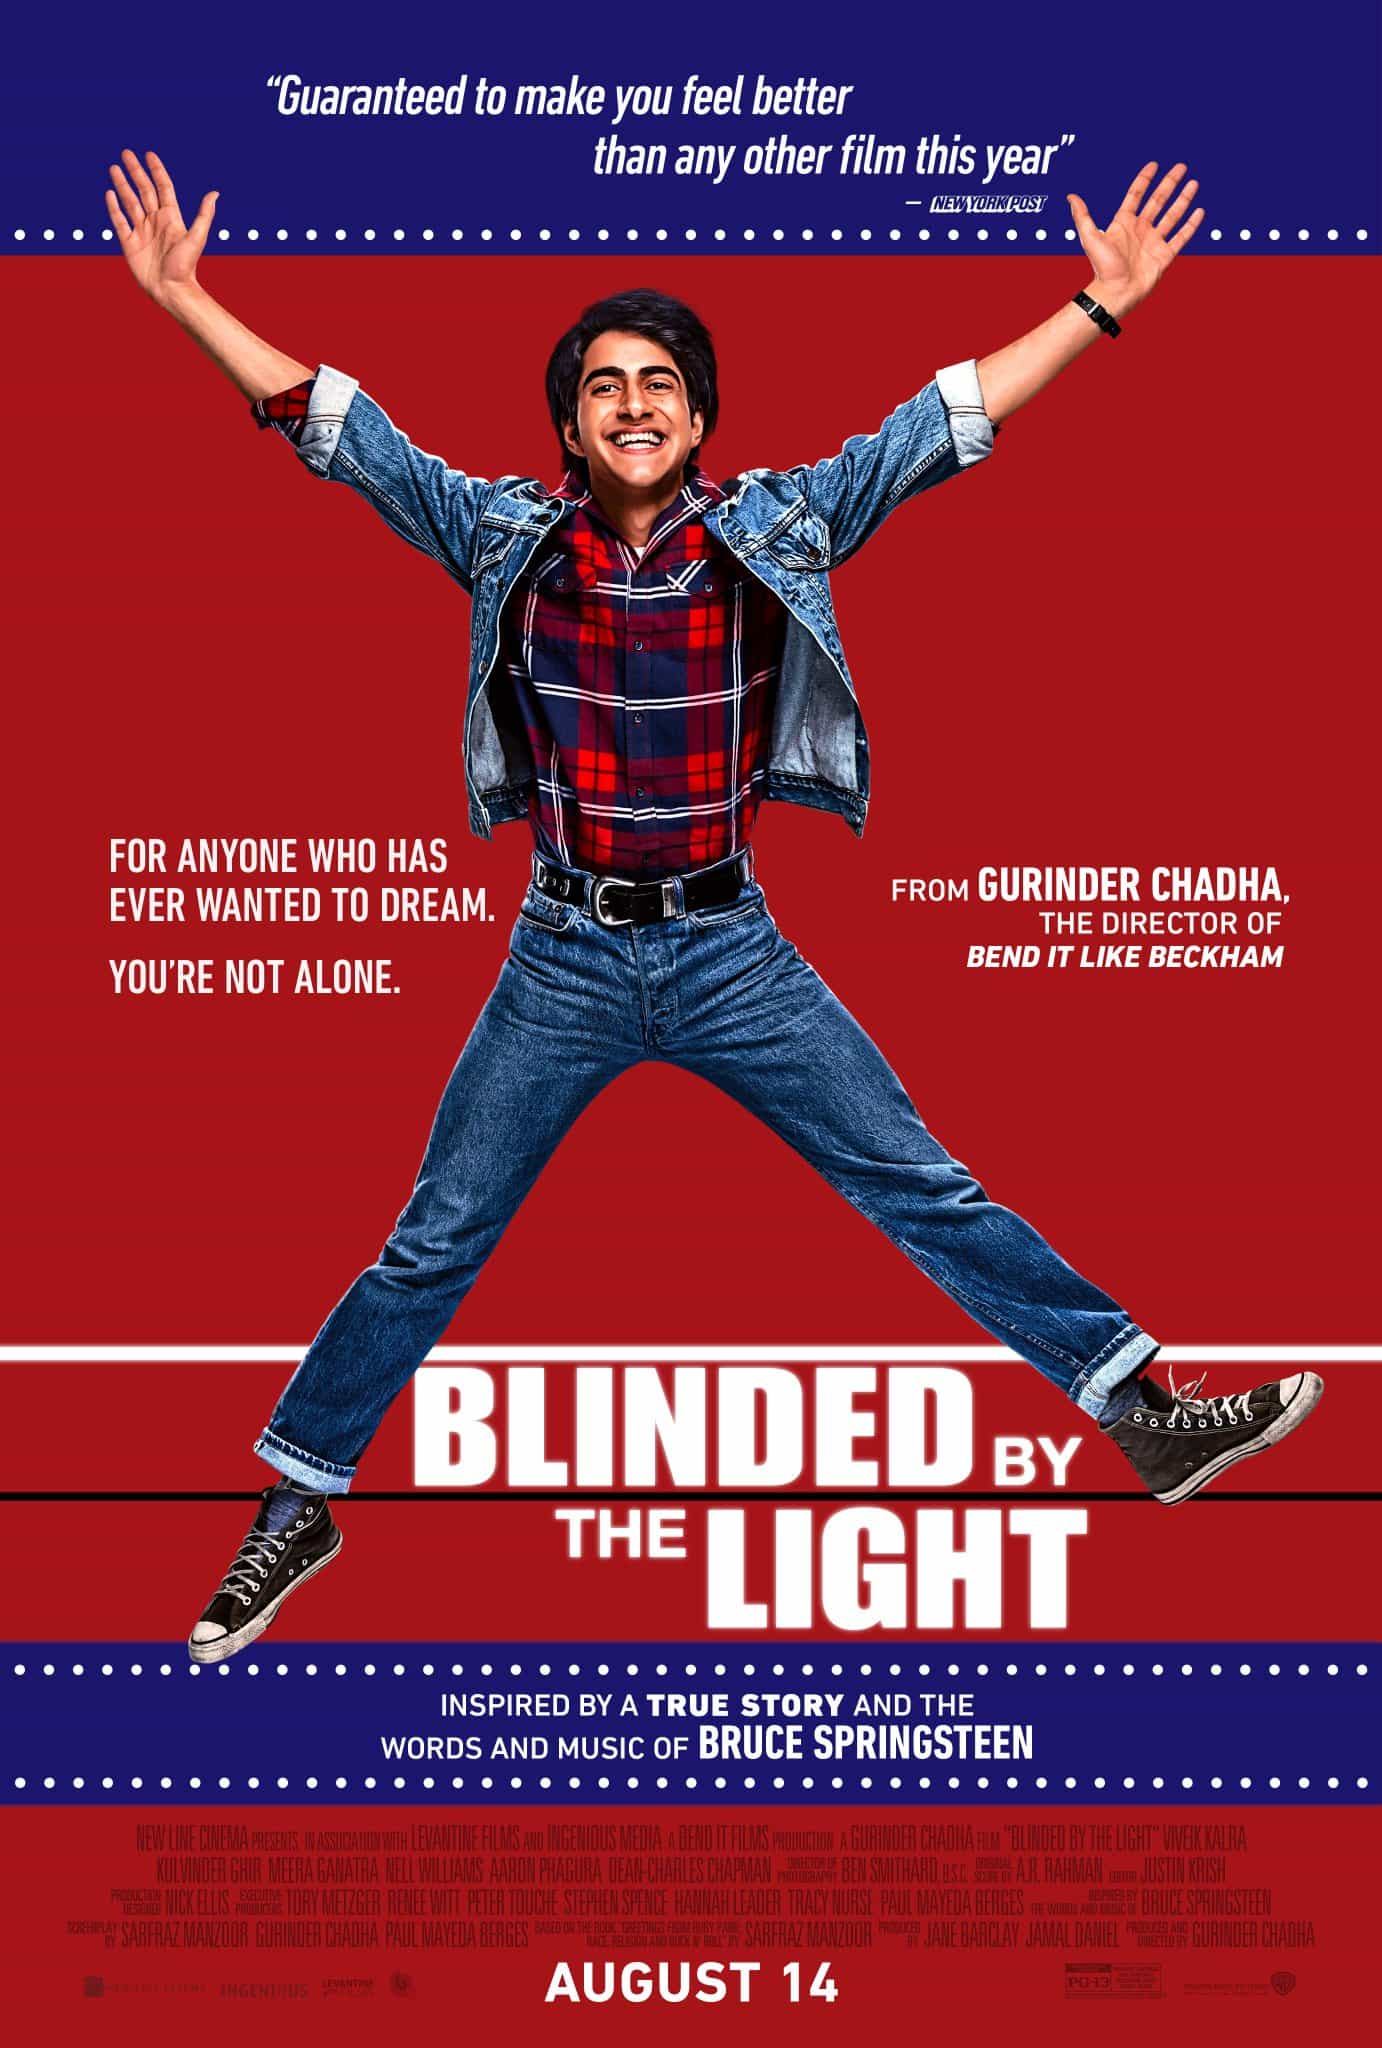 New film releases at the UK box office Friday, 9th August 2019 -  Blinded By The Light, Playmobil: The Movie and The Sun Is Also A Star